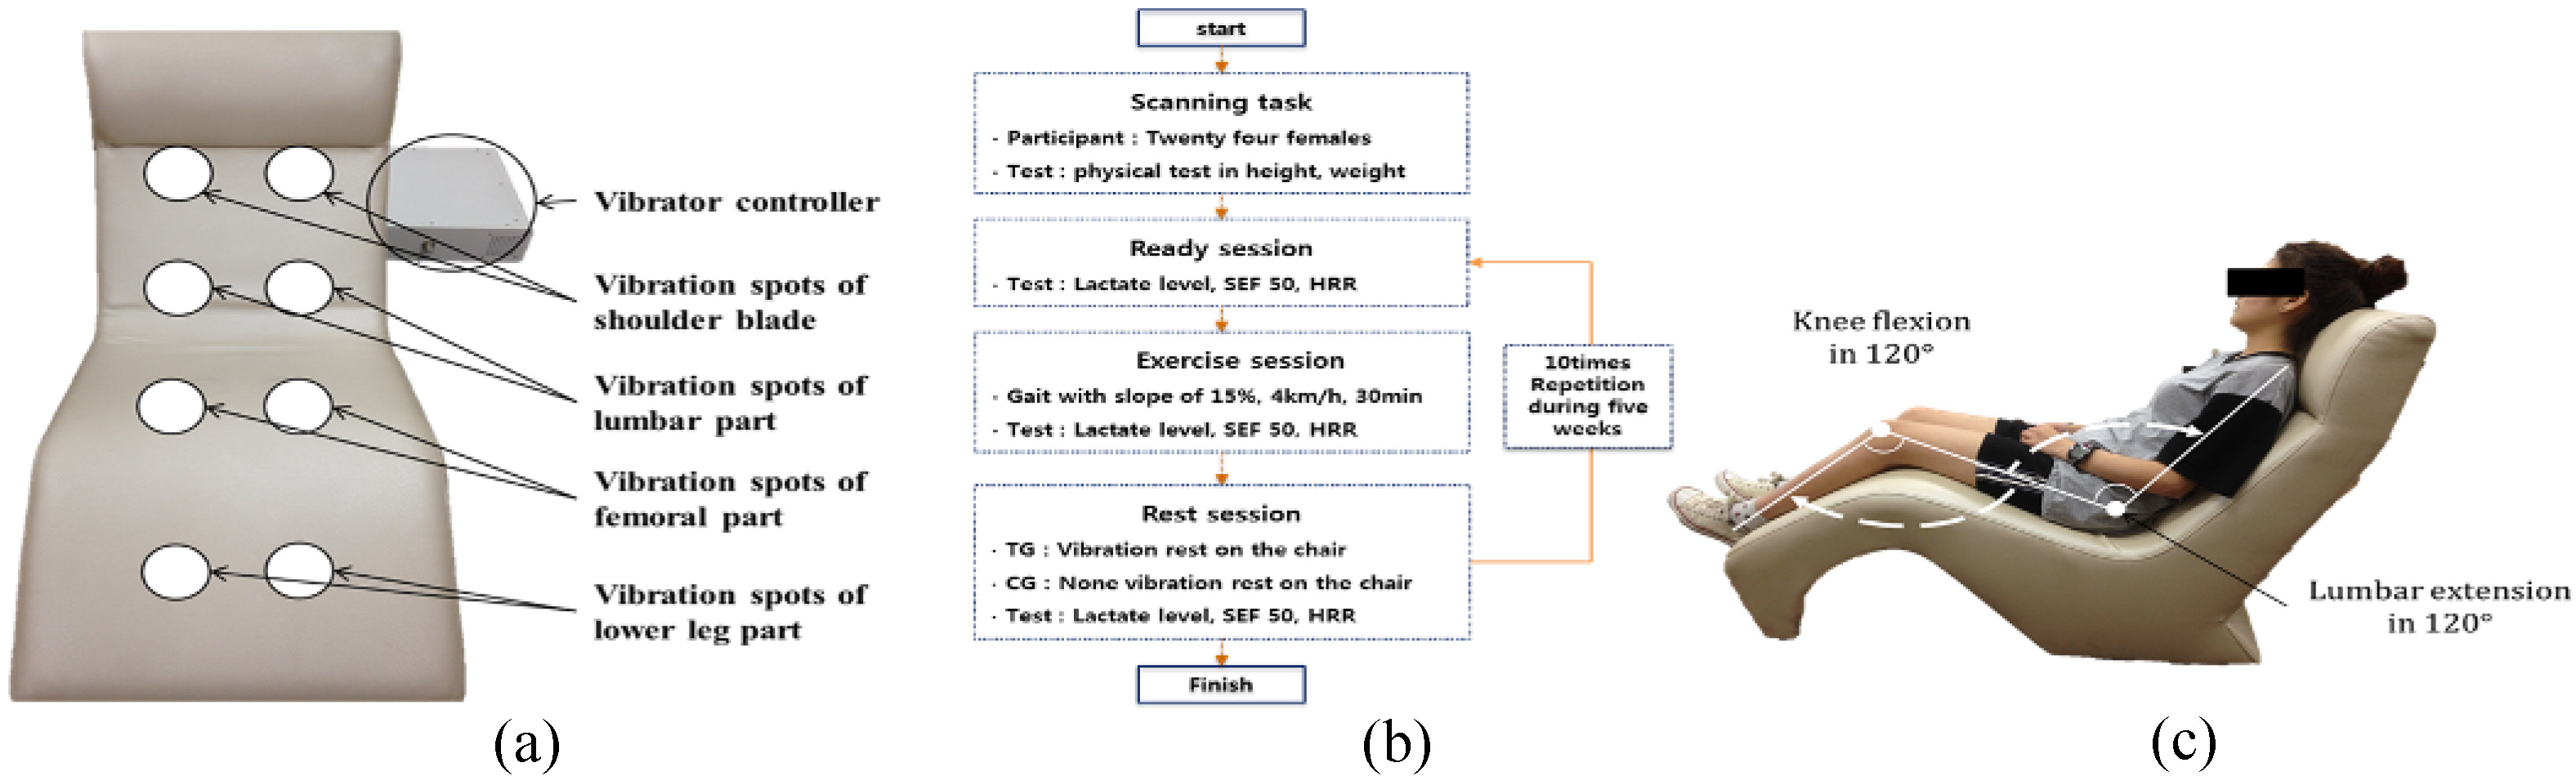 (a) Vibrations provided were up-to-down alternating vertical sinusoidal vibration in the chair using sonic waves and vibration spots, (b) Experimental procedure per session according to whole body vibration (WBV), (c) Vibration posture with angles of knee flexion and lumbar extension during the rest session in the chair-type vibrator.